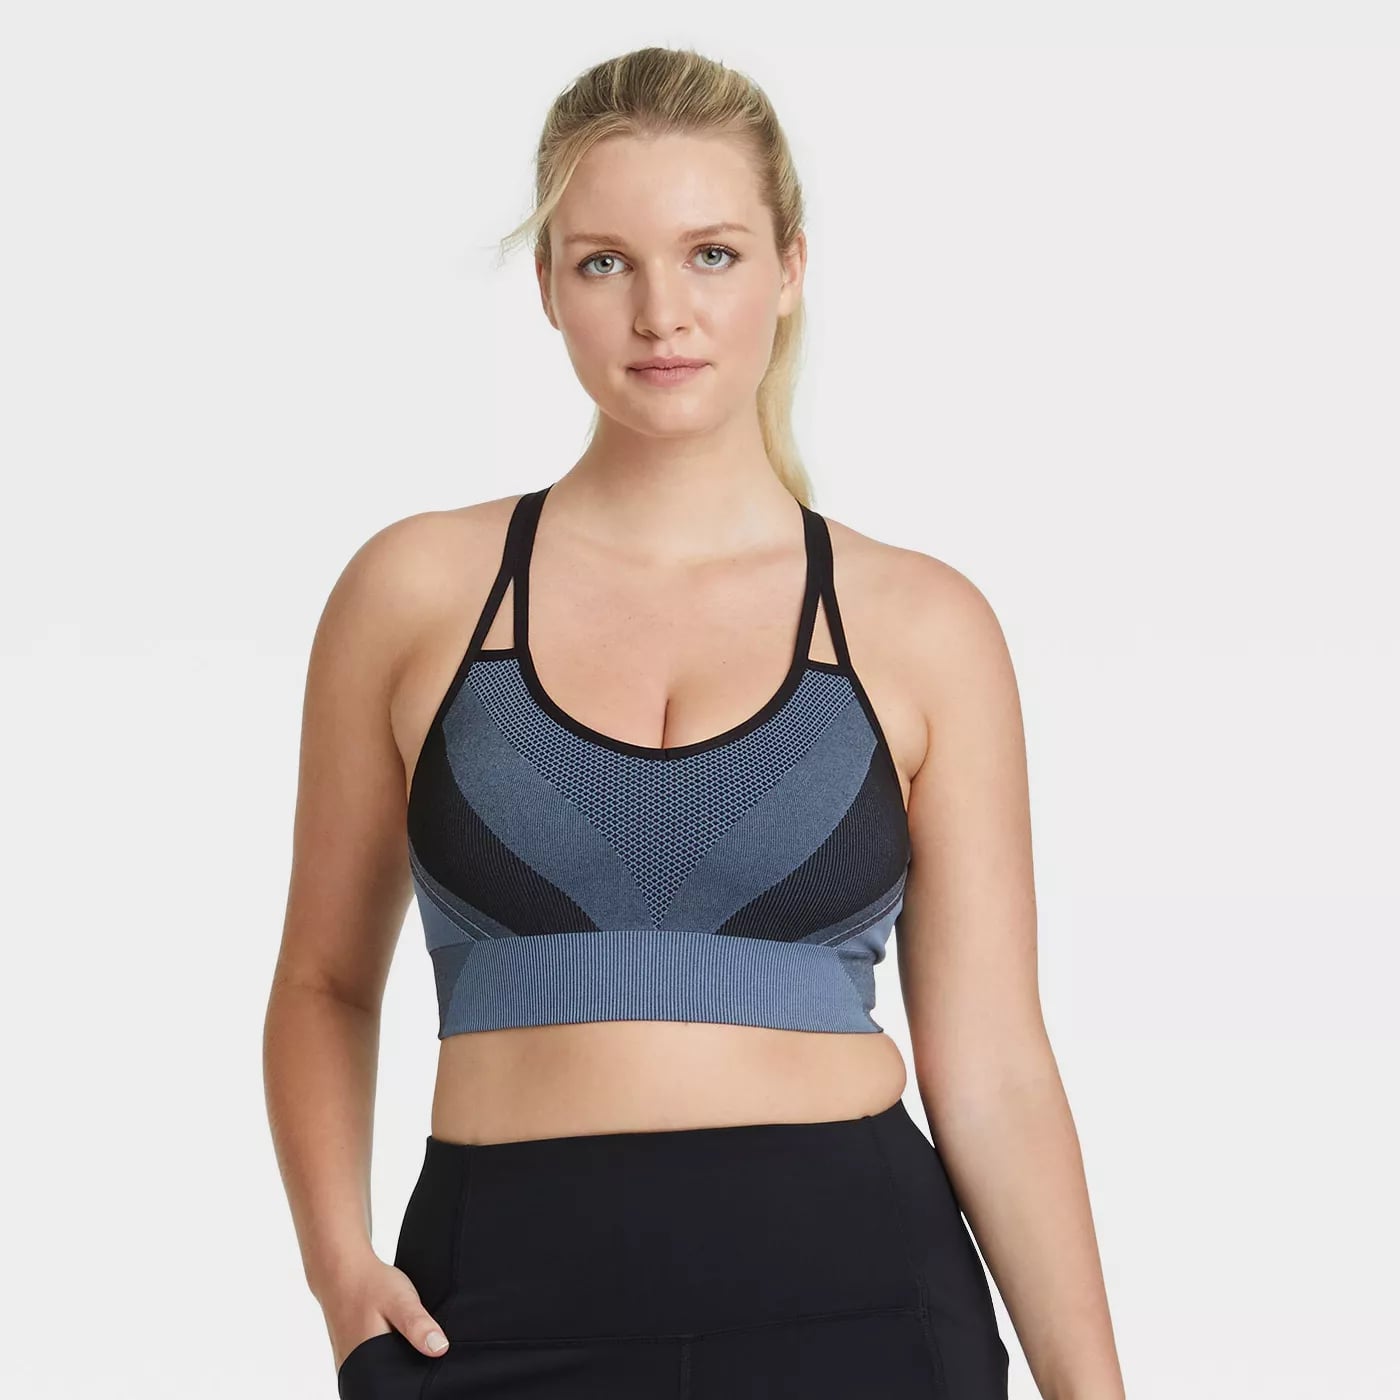 I Tried 5 Sports Bras to Size Up How They Fit Larger Busts - Blogilates